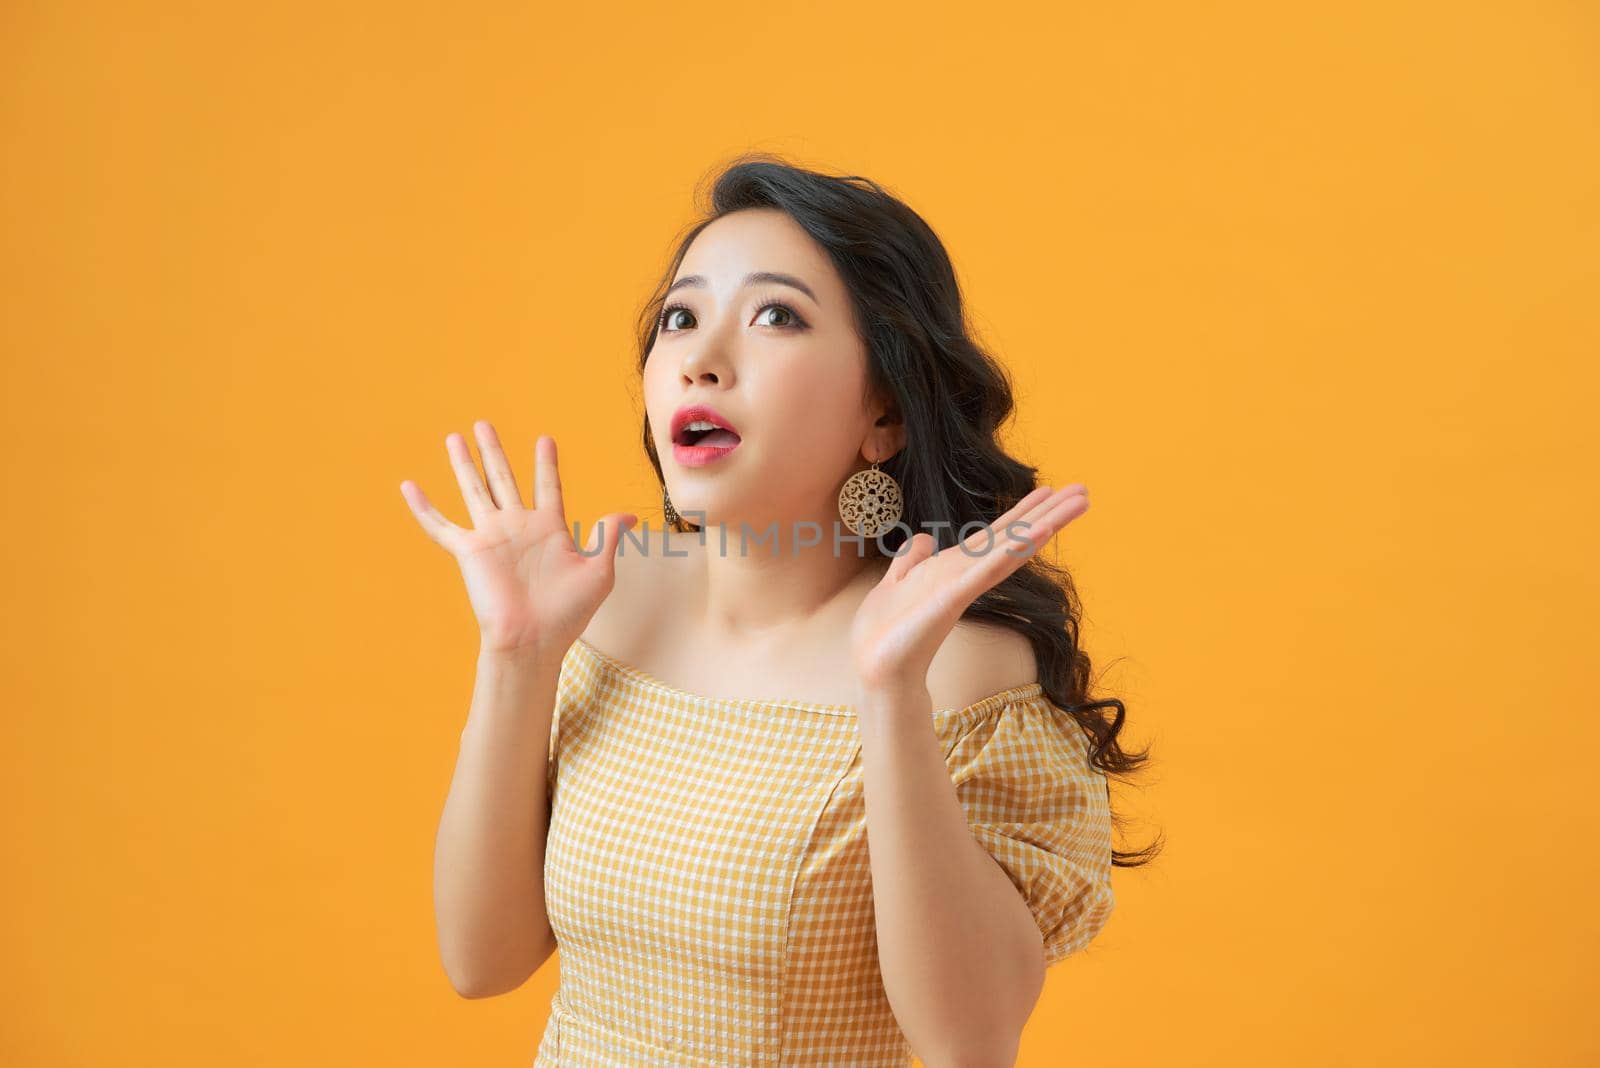 Surprised young woman shouting over yellow background. Looking at camera